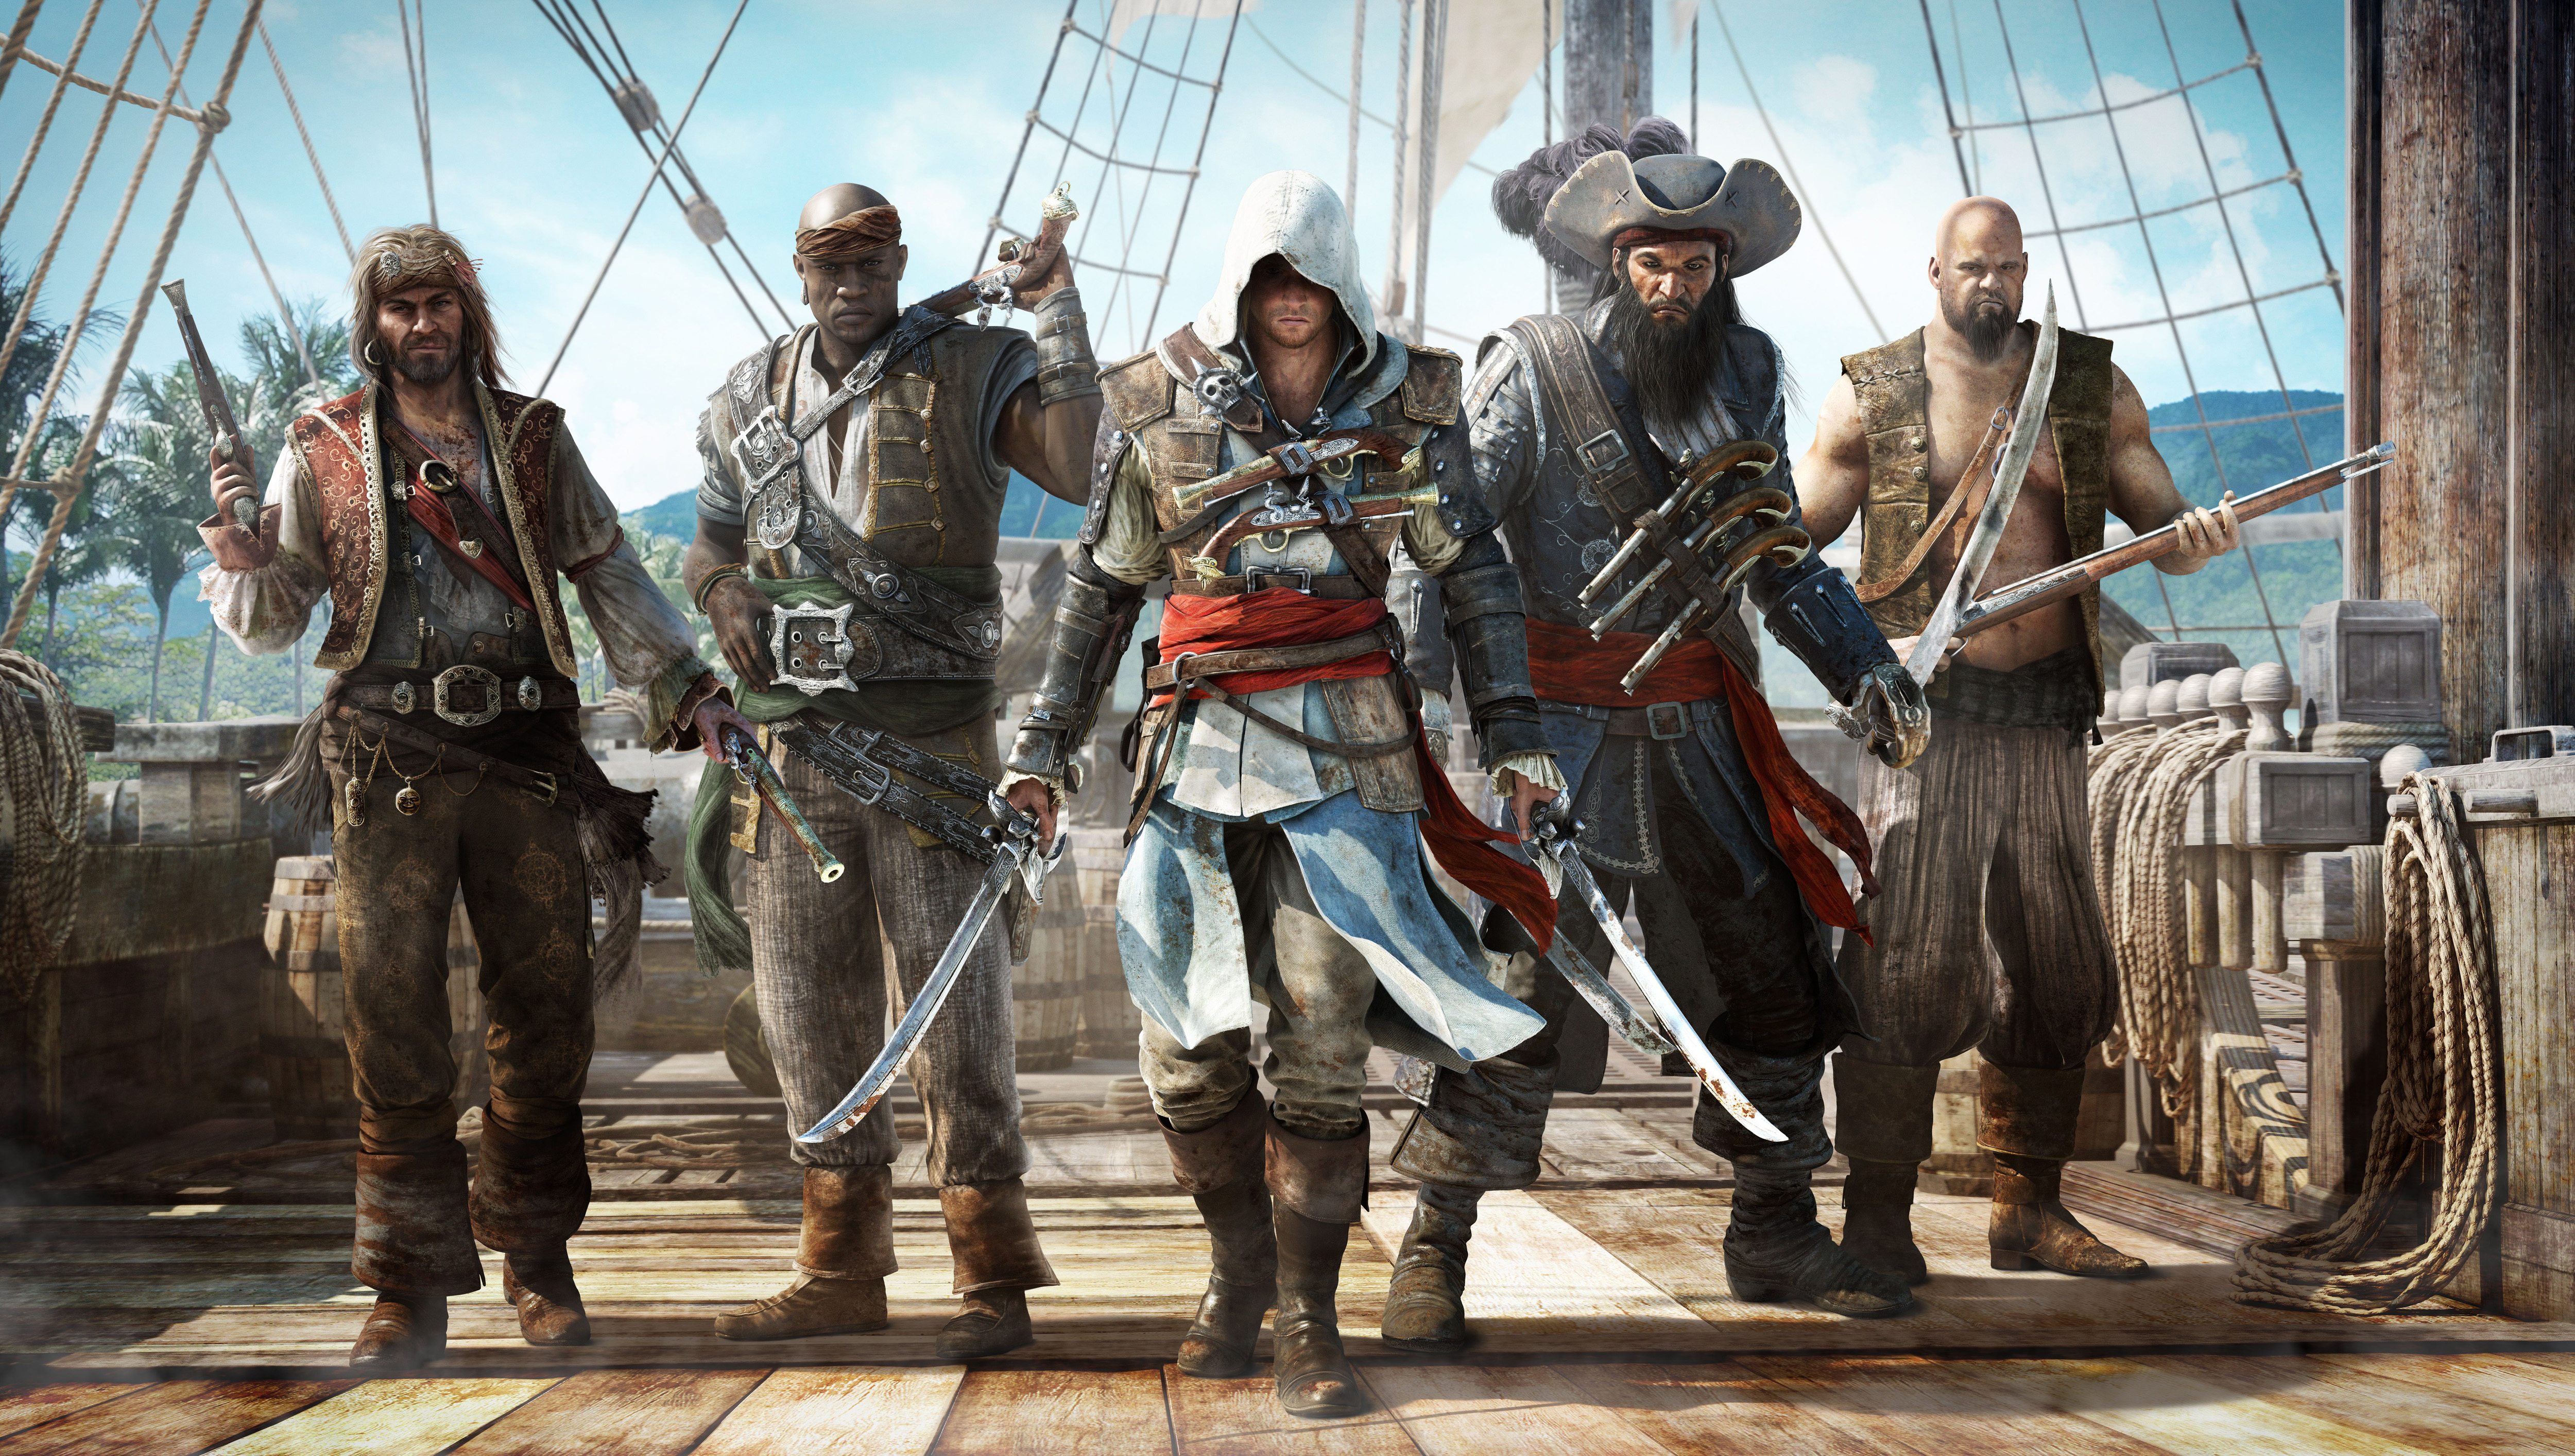 Assassin’s Creed IV: The Review (Of A Casual Gamer)